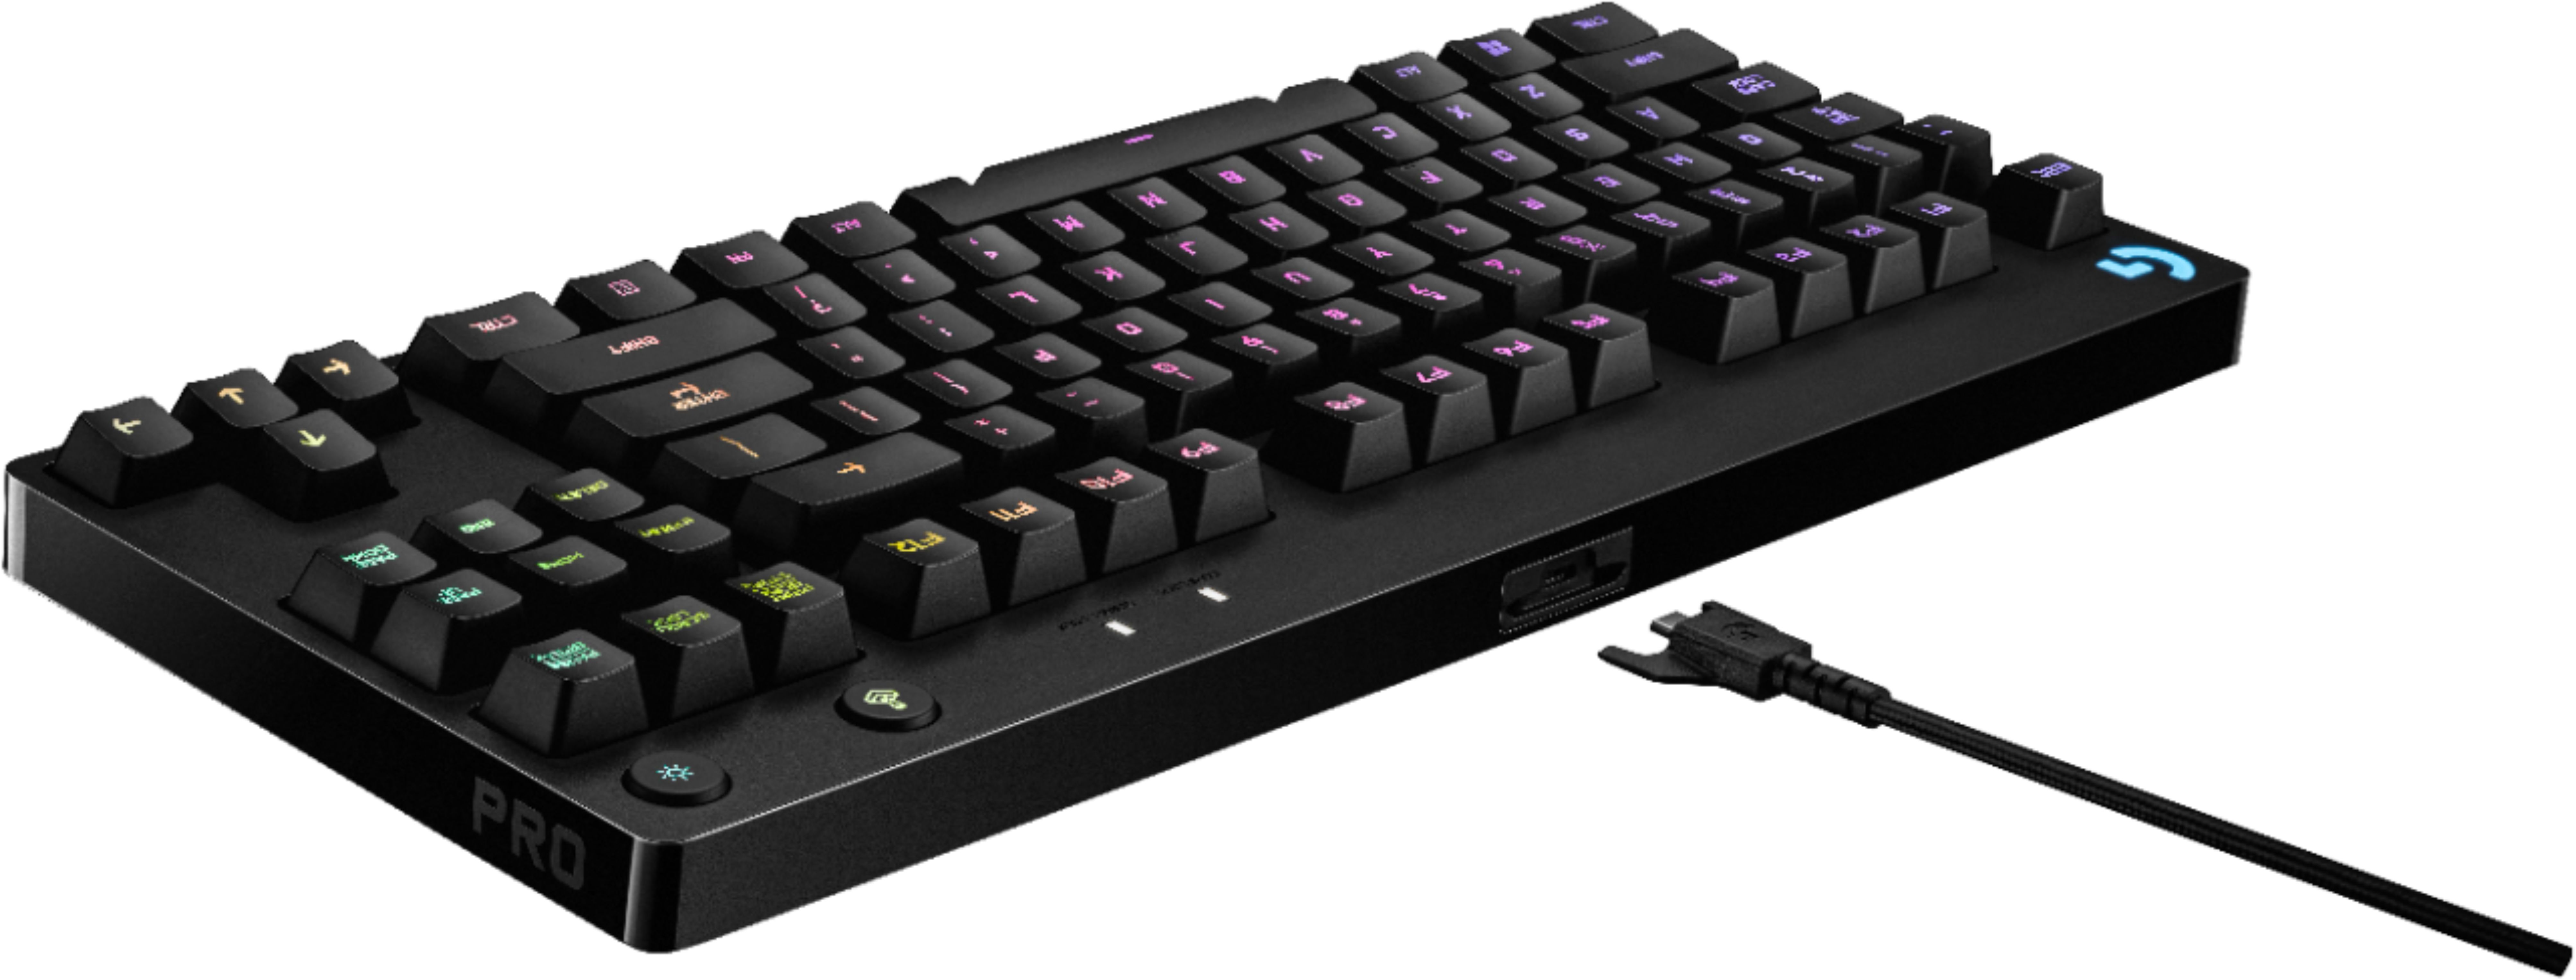 Best Buy Logitech G Pro Wired Gaming Mechanical Romer G Switch Keyboard With Rgb Backlighting Black 9 0090